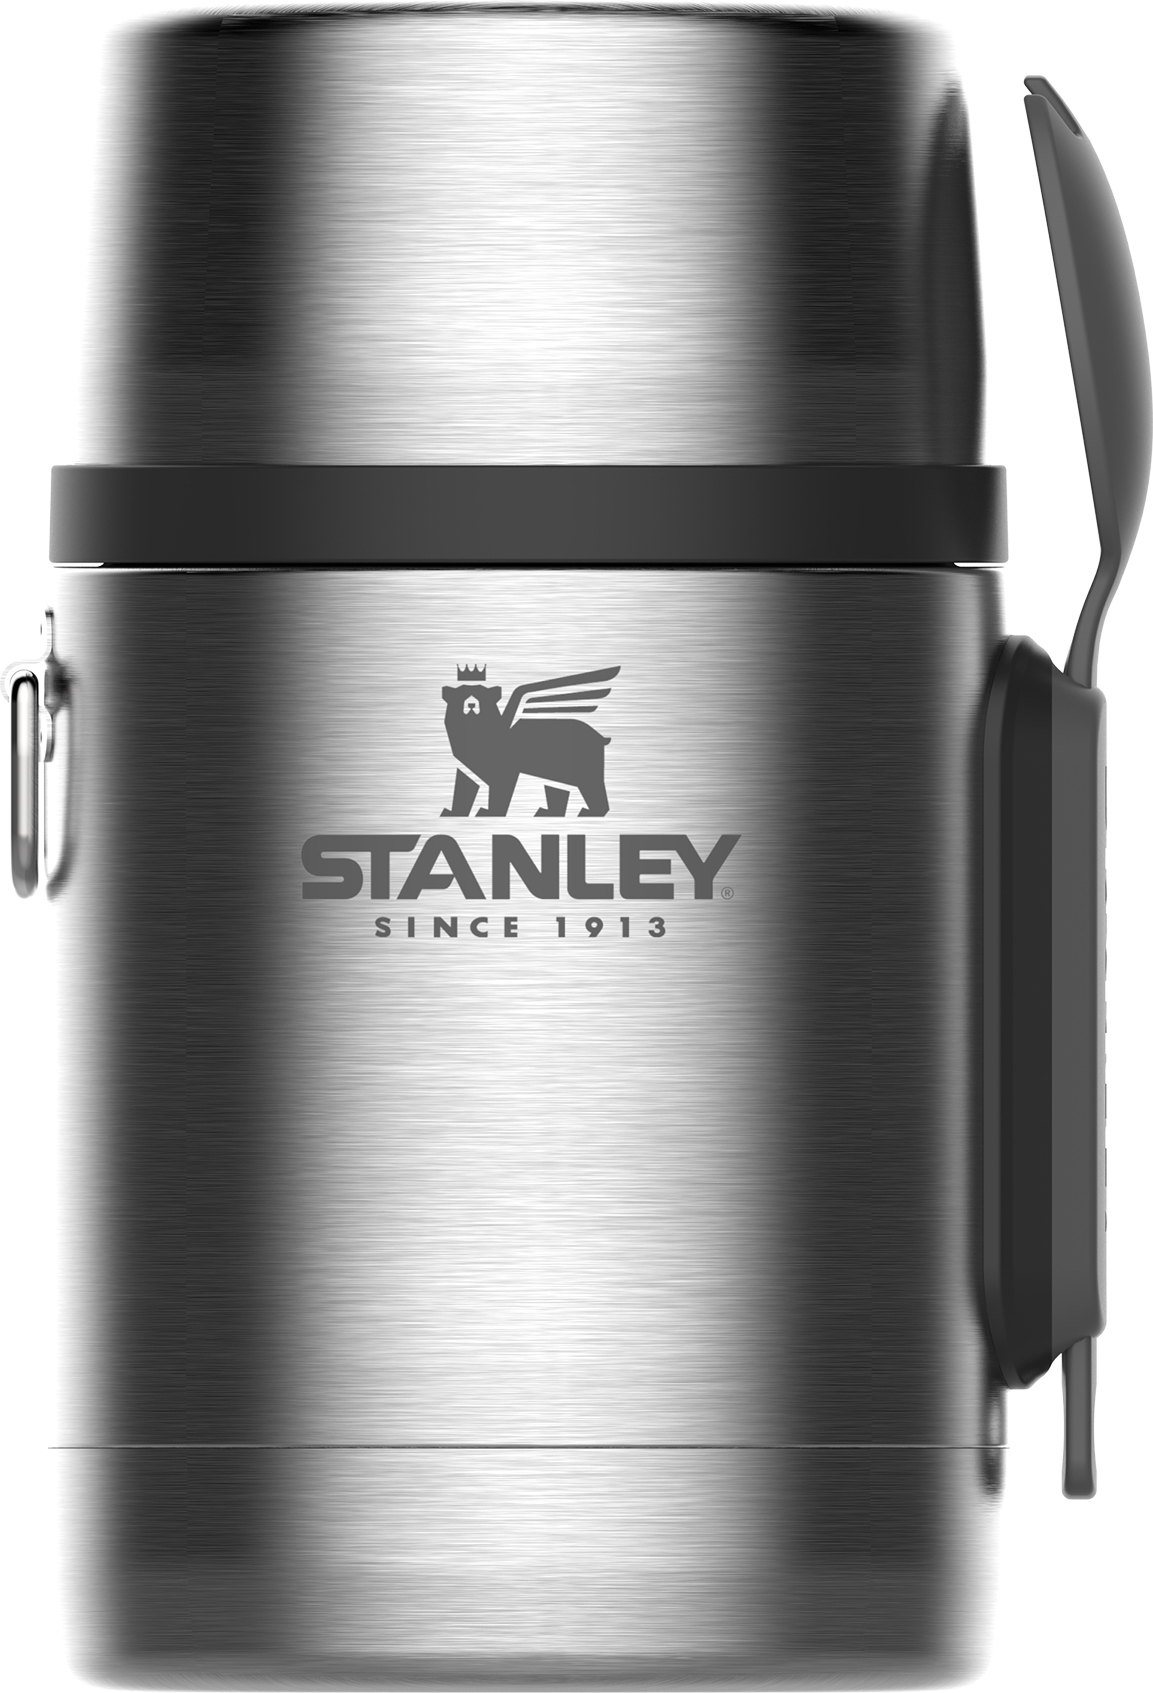 https://3fa-media.com/stanley/stanley-adventure-thermos-0-53-l-for-dinner-with-cutlery__72274_497ca74-s2500x2500.jpg